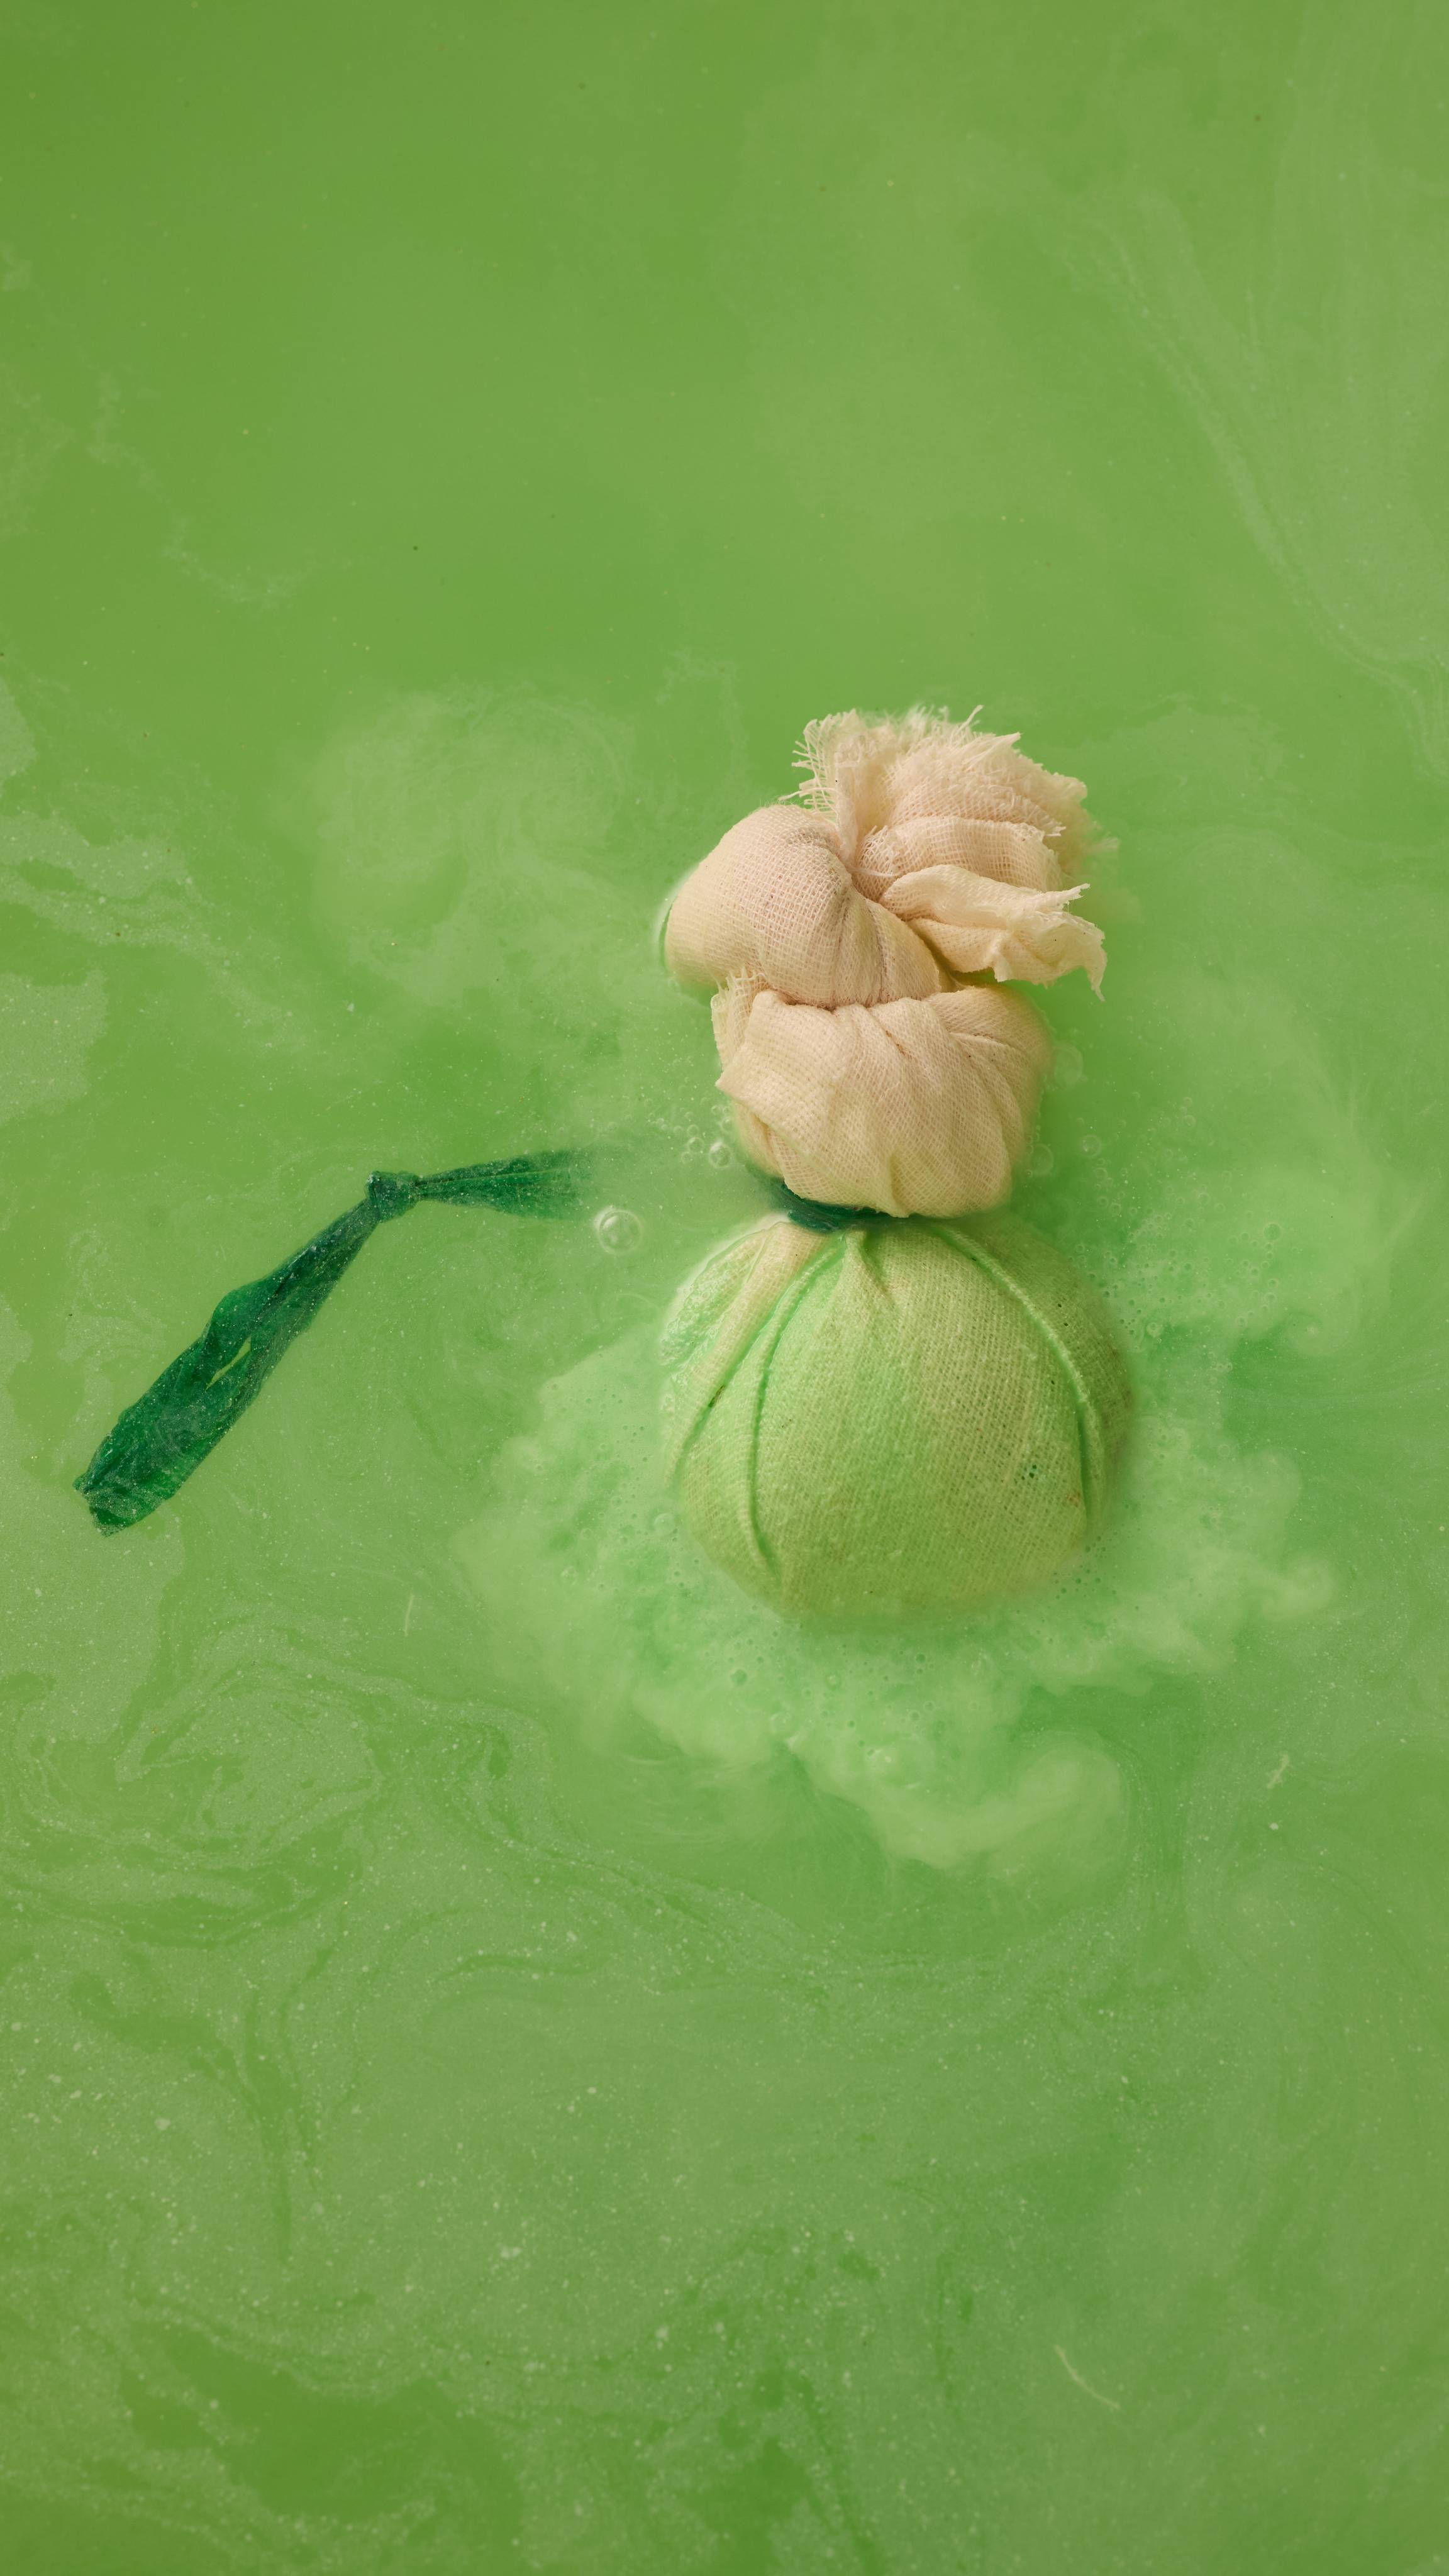 The Woodstock bath bomb is sitting in the bath as we see the deep green from the bath bomb inside the muslin seeps out into the water turning it into a sea of forest green.